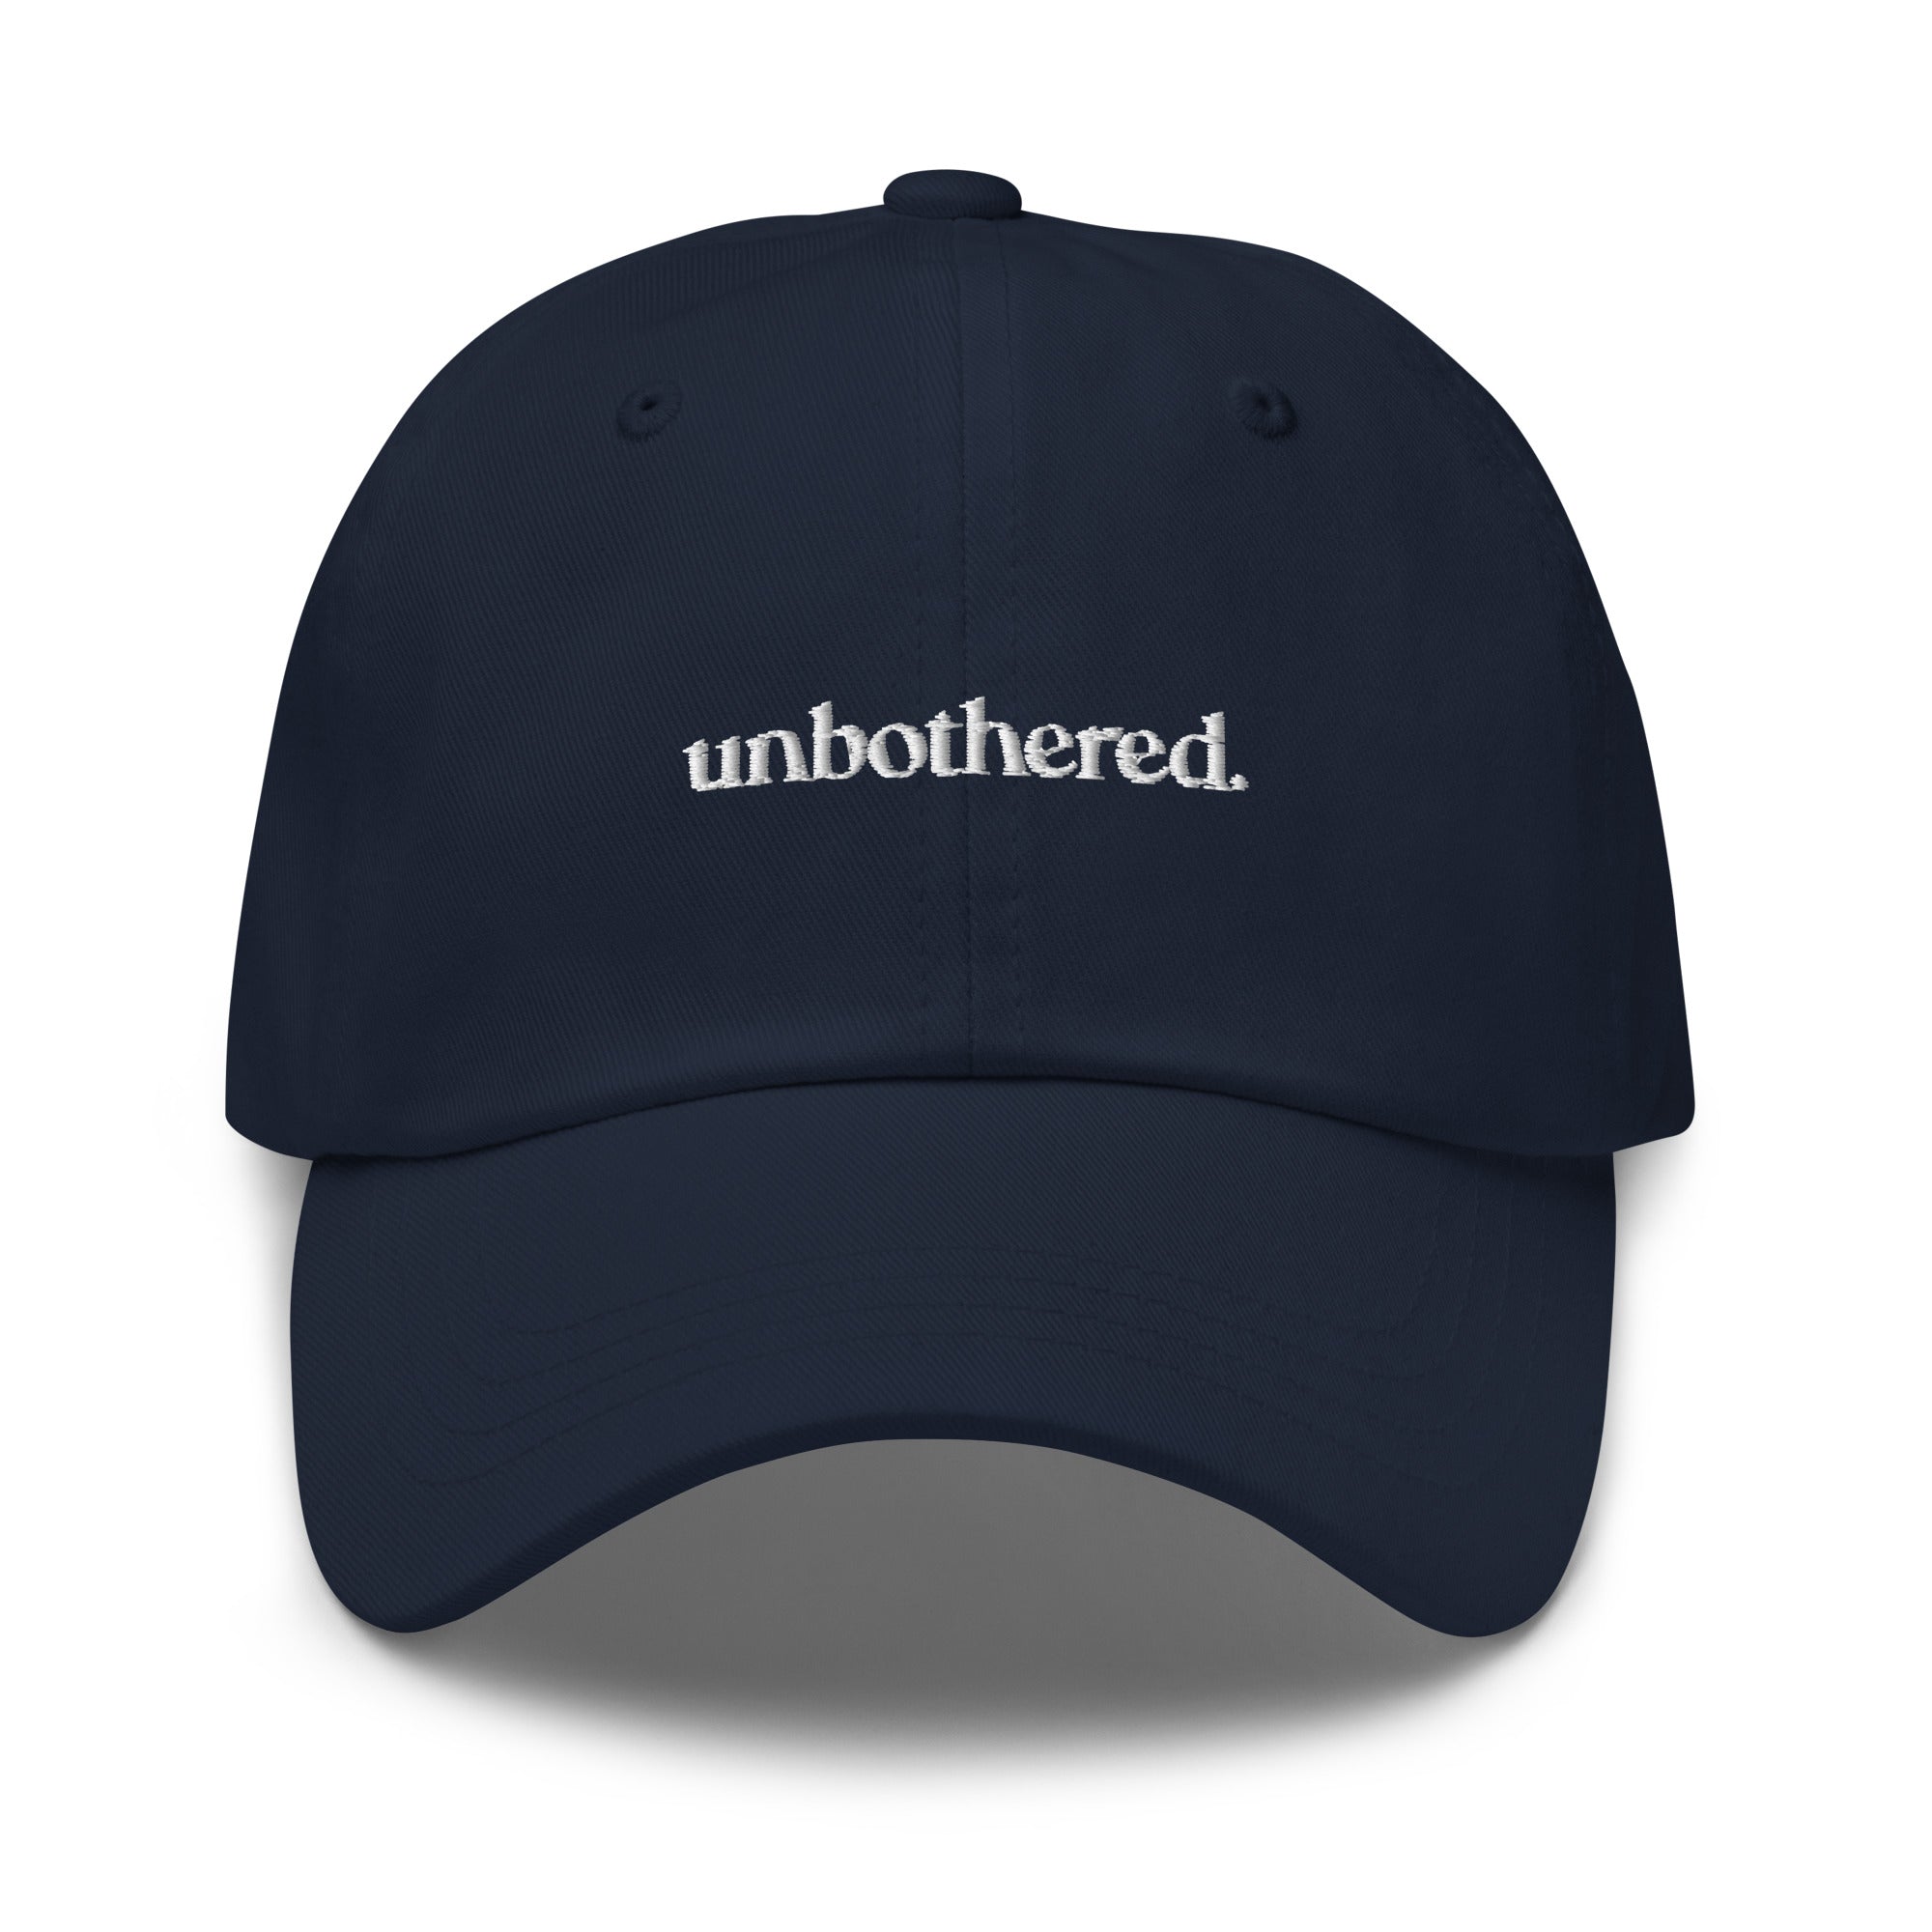 Unbothered - Dad hat